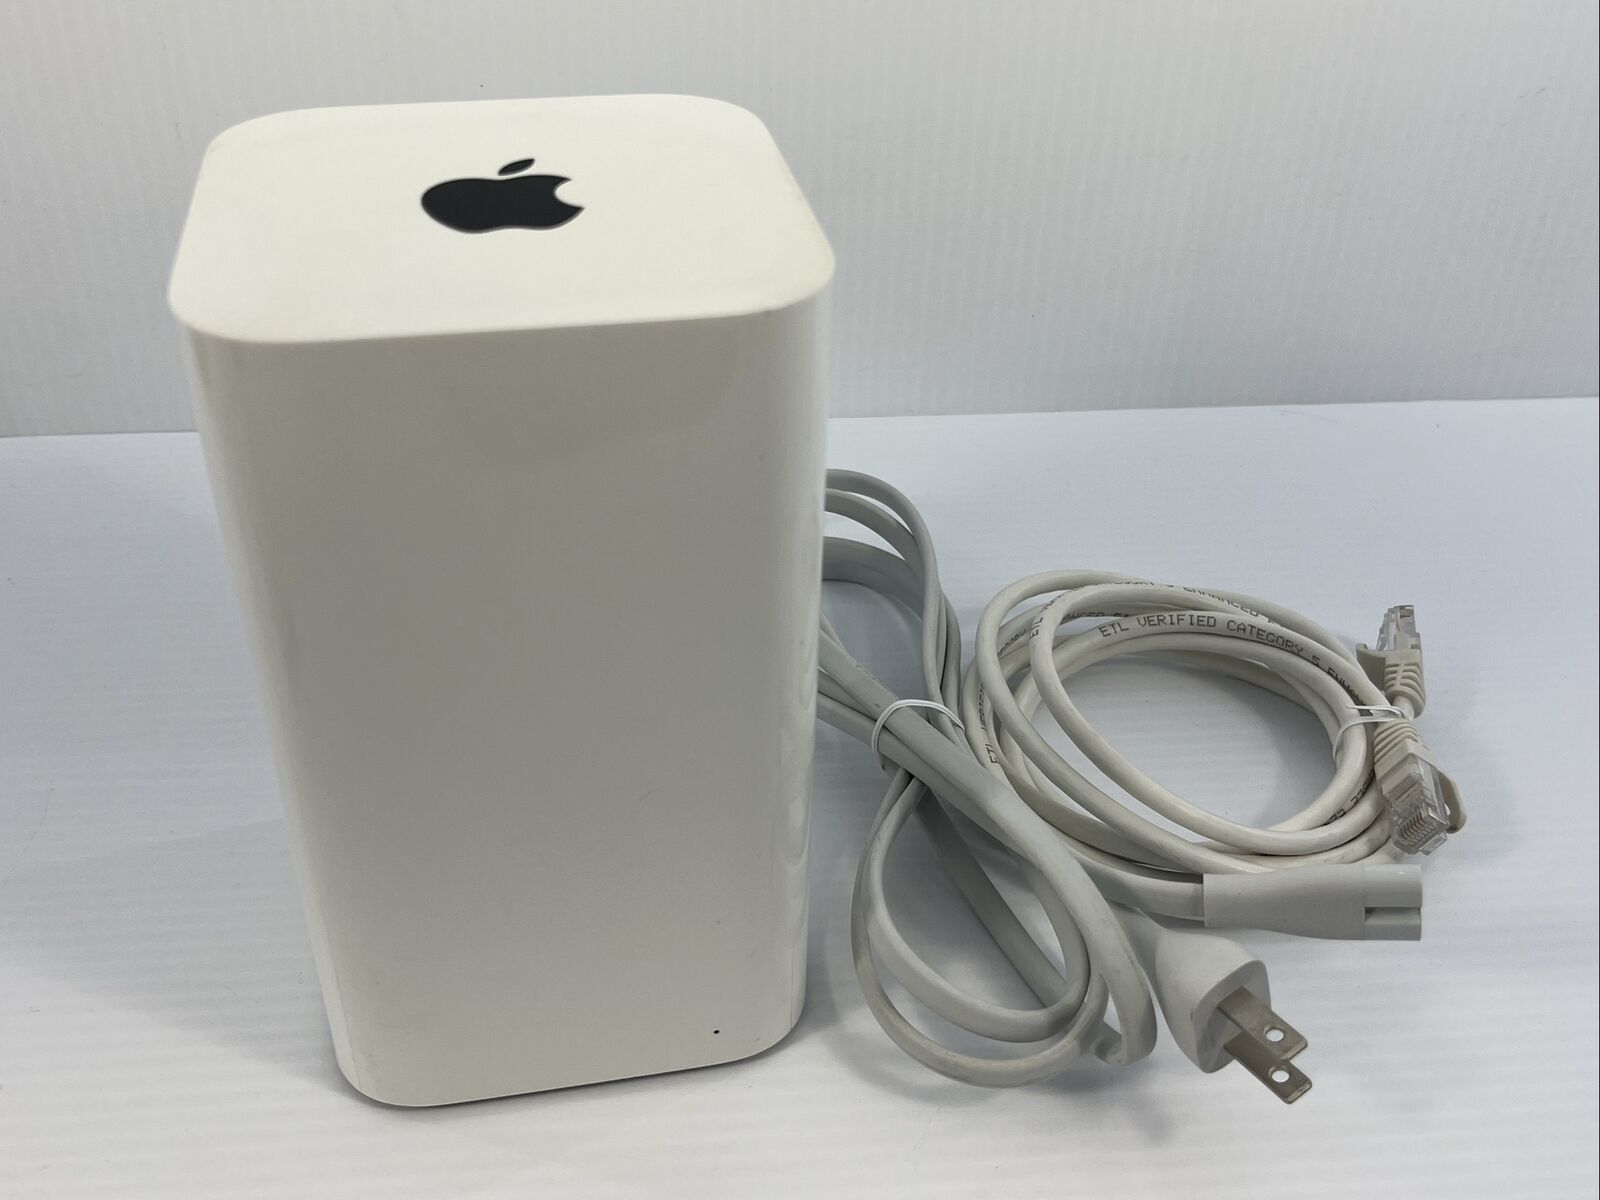 Apple AirPort Time Capsule 2TB 5th Gen A1470 Wireless AC Router w/ Cords